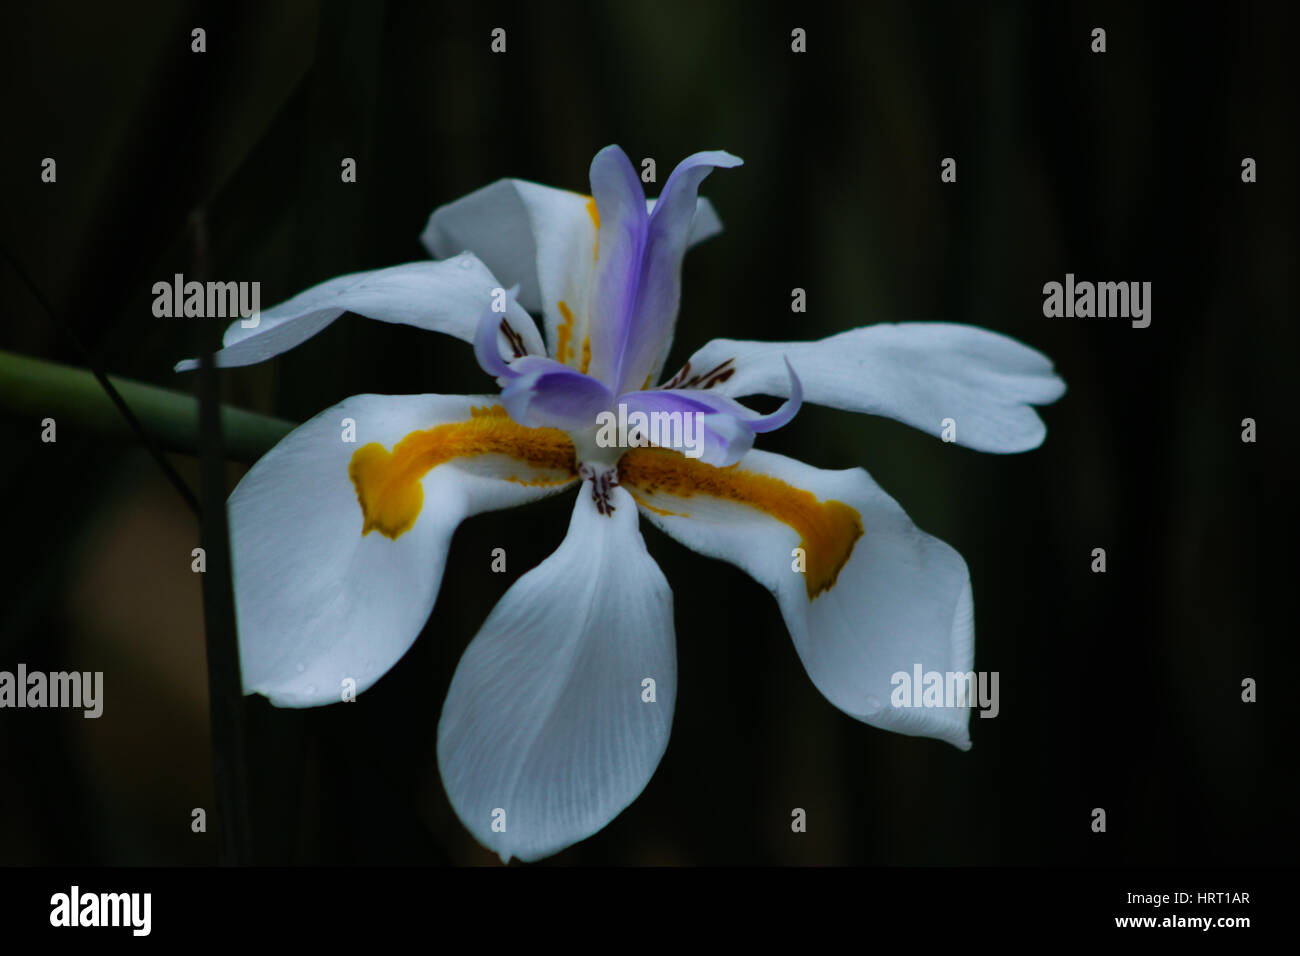 Single Dietes iridioides (African iris). Ornamental plant in the Iridaceae family: white flower marked with yellow and violet, with six free petals. Stock Photo